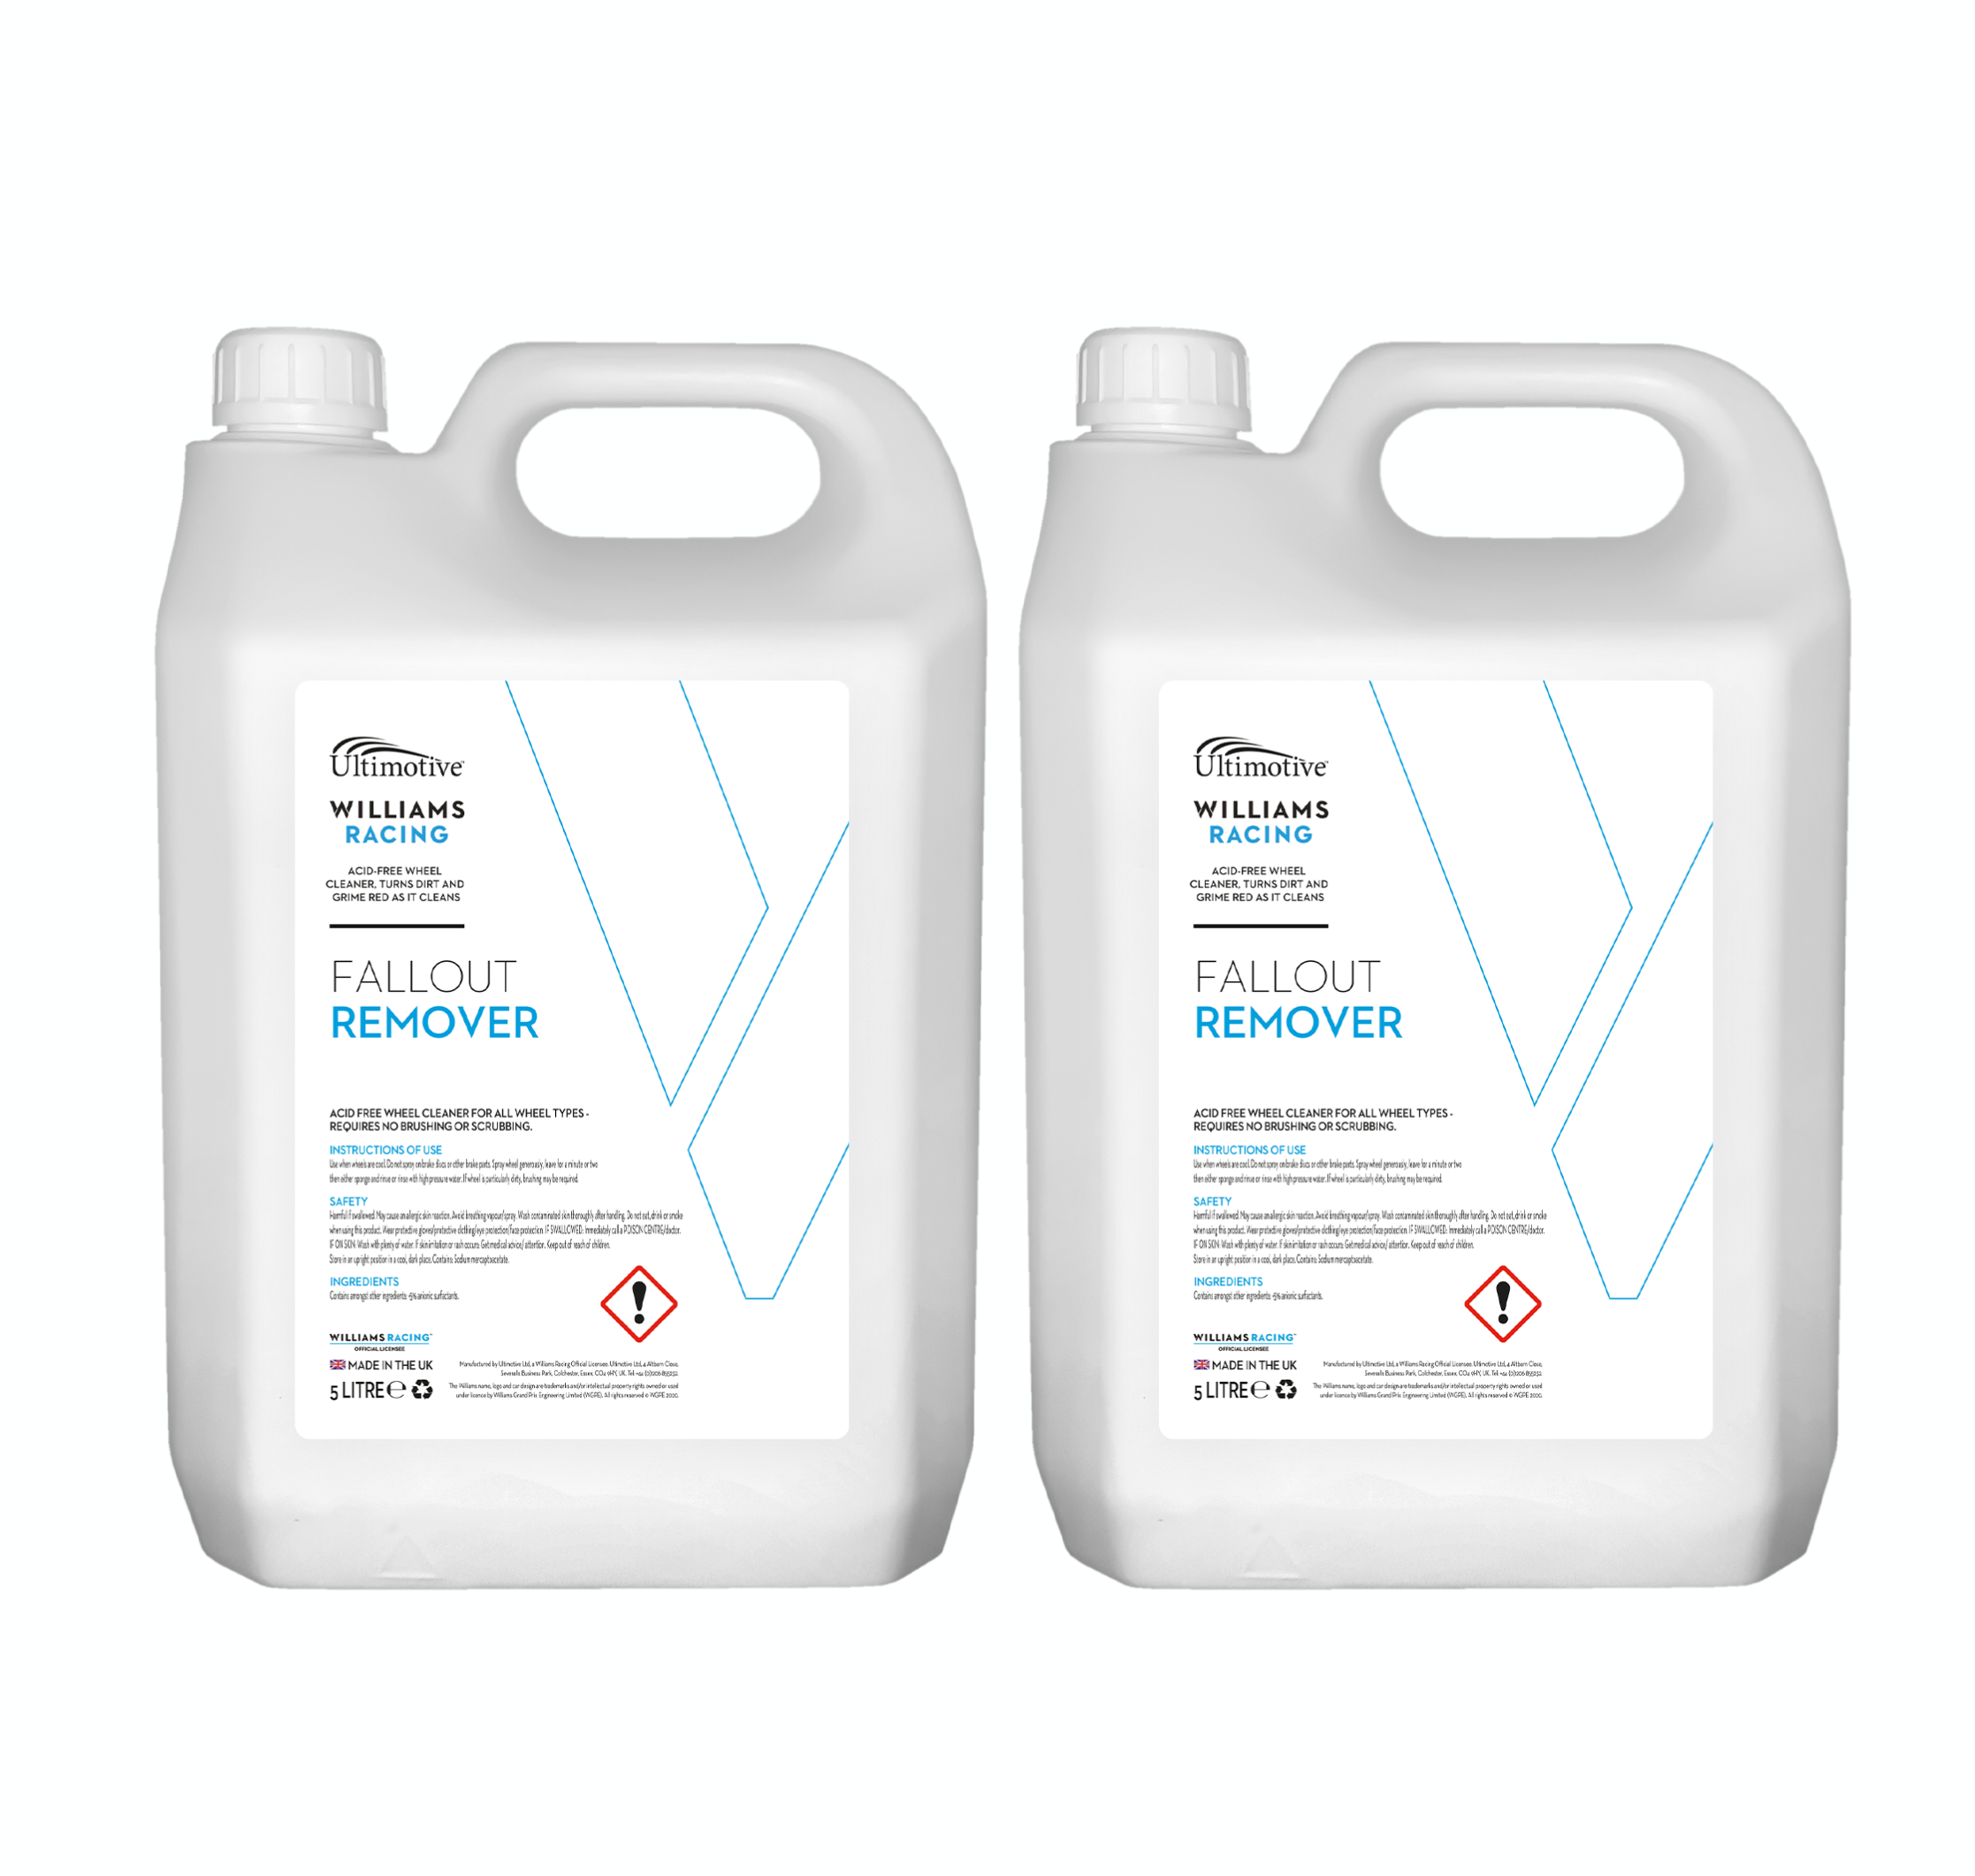 Williams Racing Fallout Remover 2 x 5L Multi-Pack